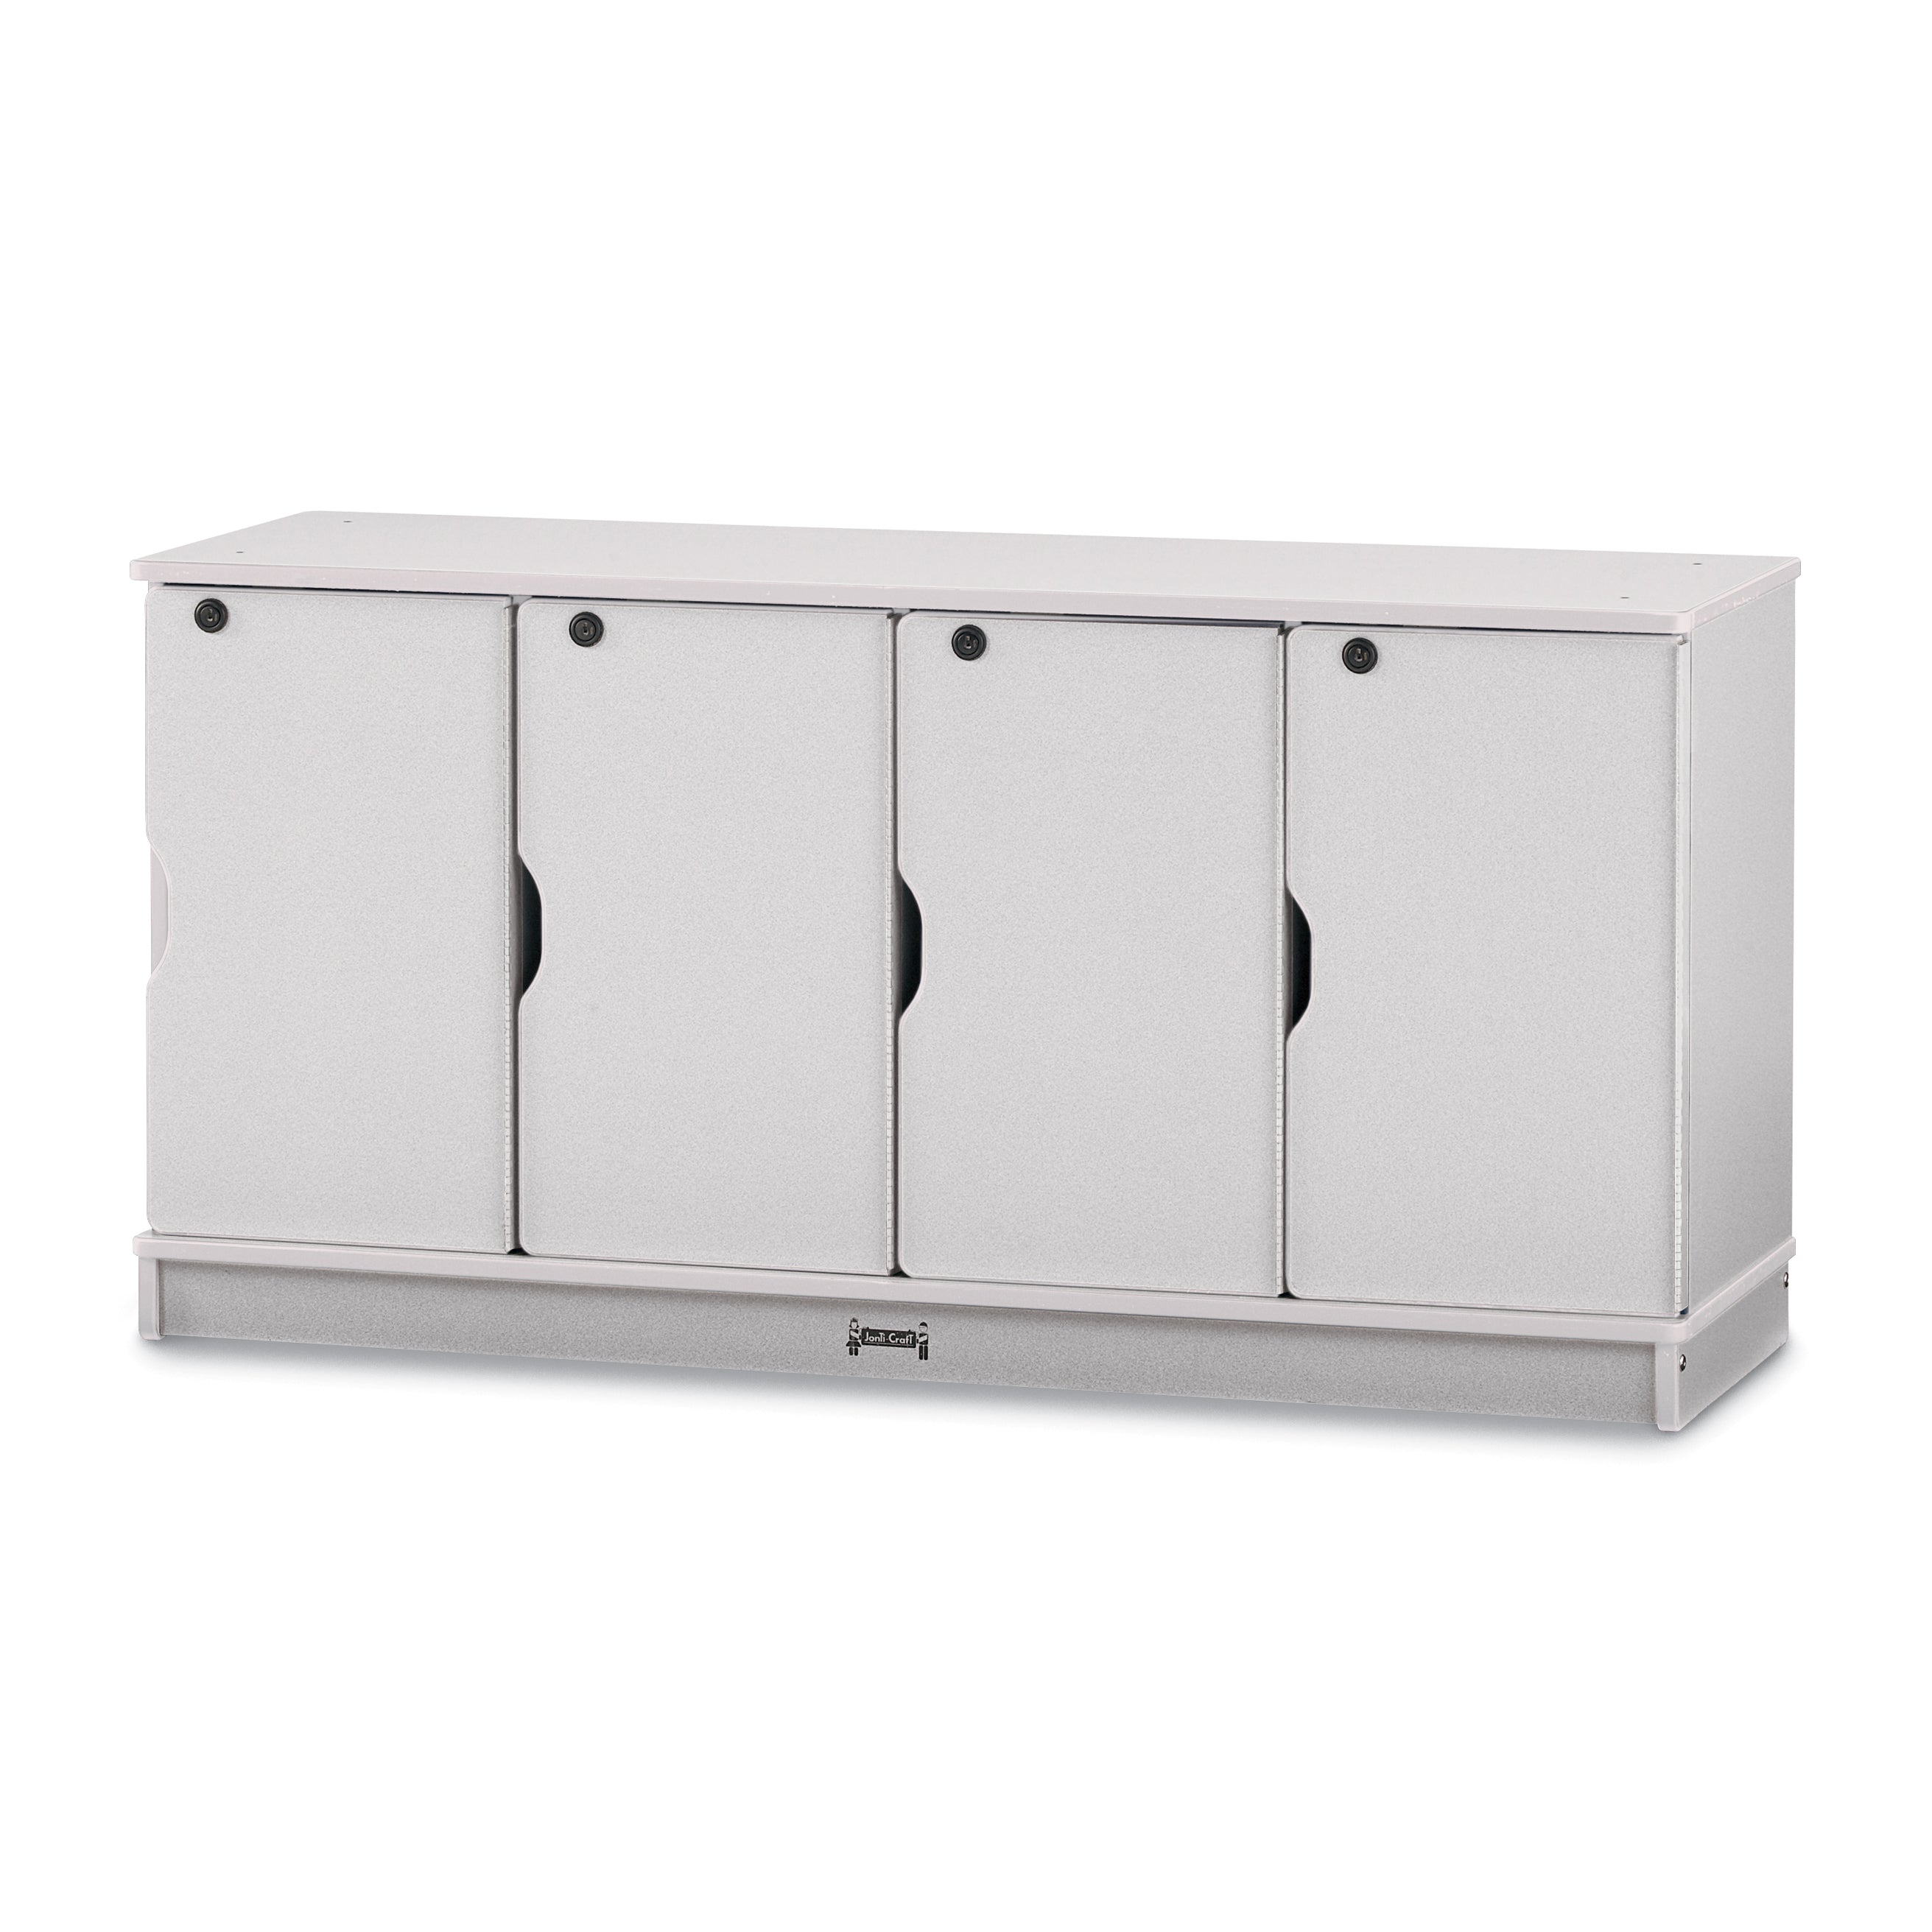 4688JC000, Rainbow Accents Stacking Lockable Lockers -  Single Stack  - Gray